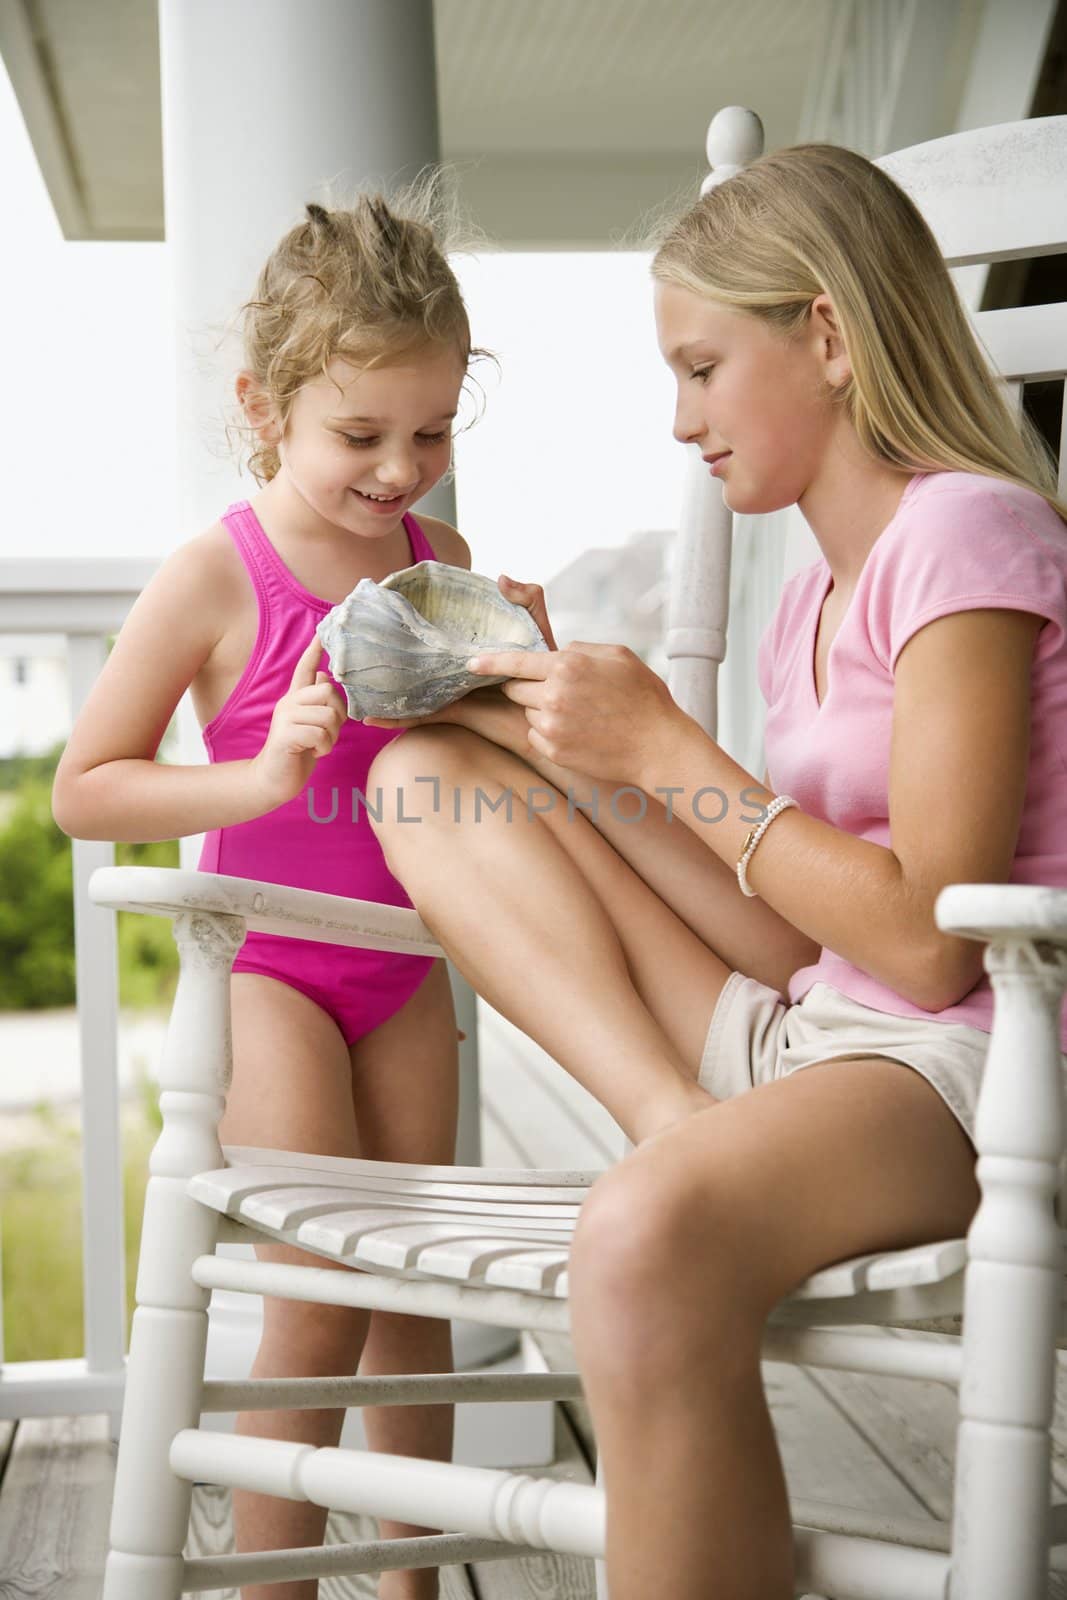 Caucasian pre-teen girl showing conch shell to other Caucasian female child.